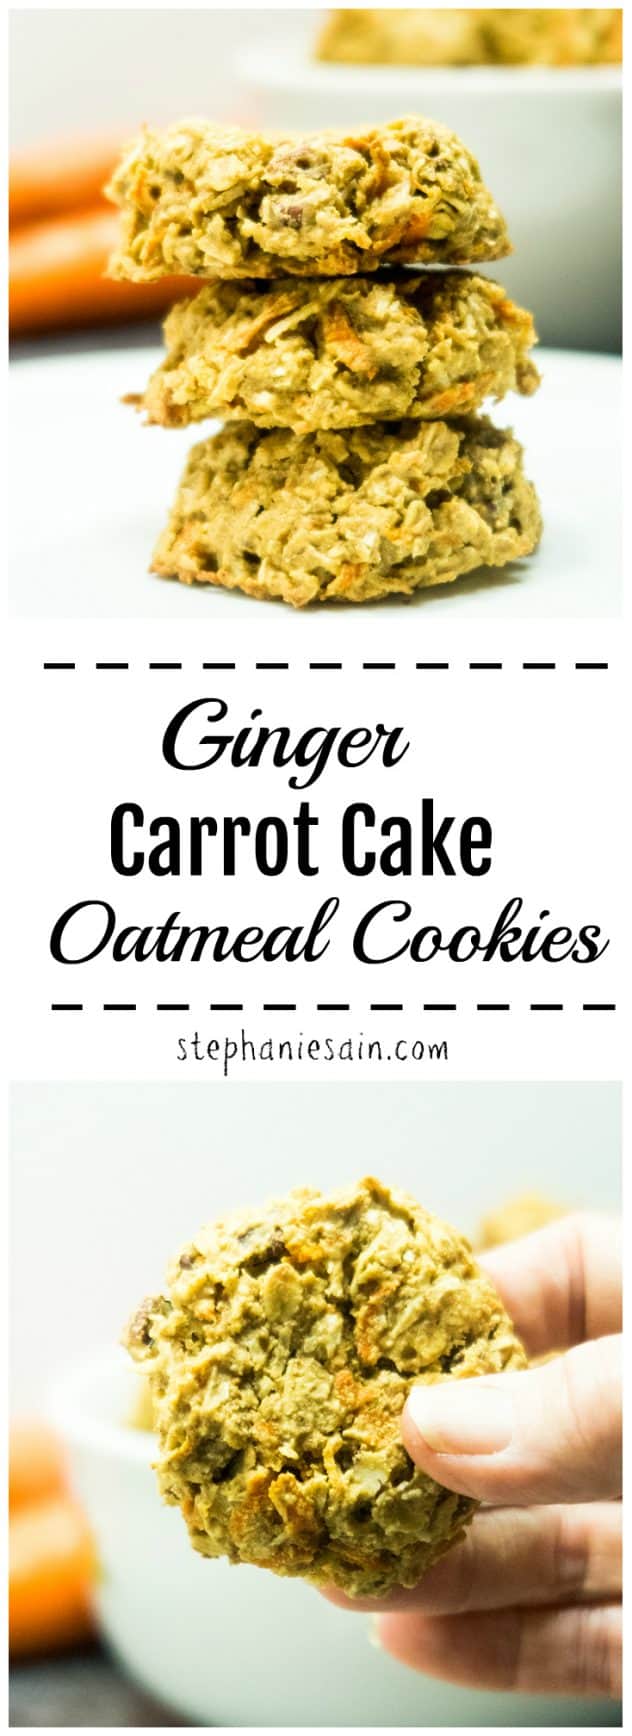 Ginger Carrot Cake Oatmeal Cookies are tasty little cookies with the flavors of carrot cake. Great for a healthy breakfast or quick snack. No Added refined sugars, Gluten Free, & Vegan option.